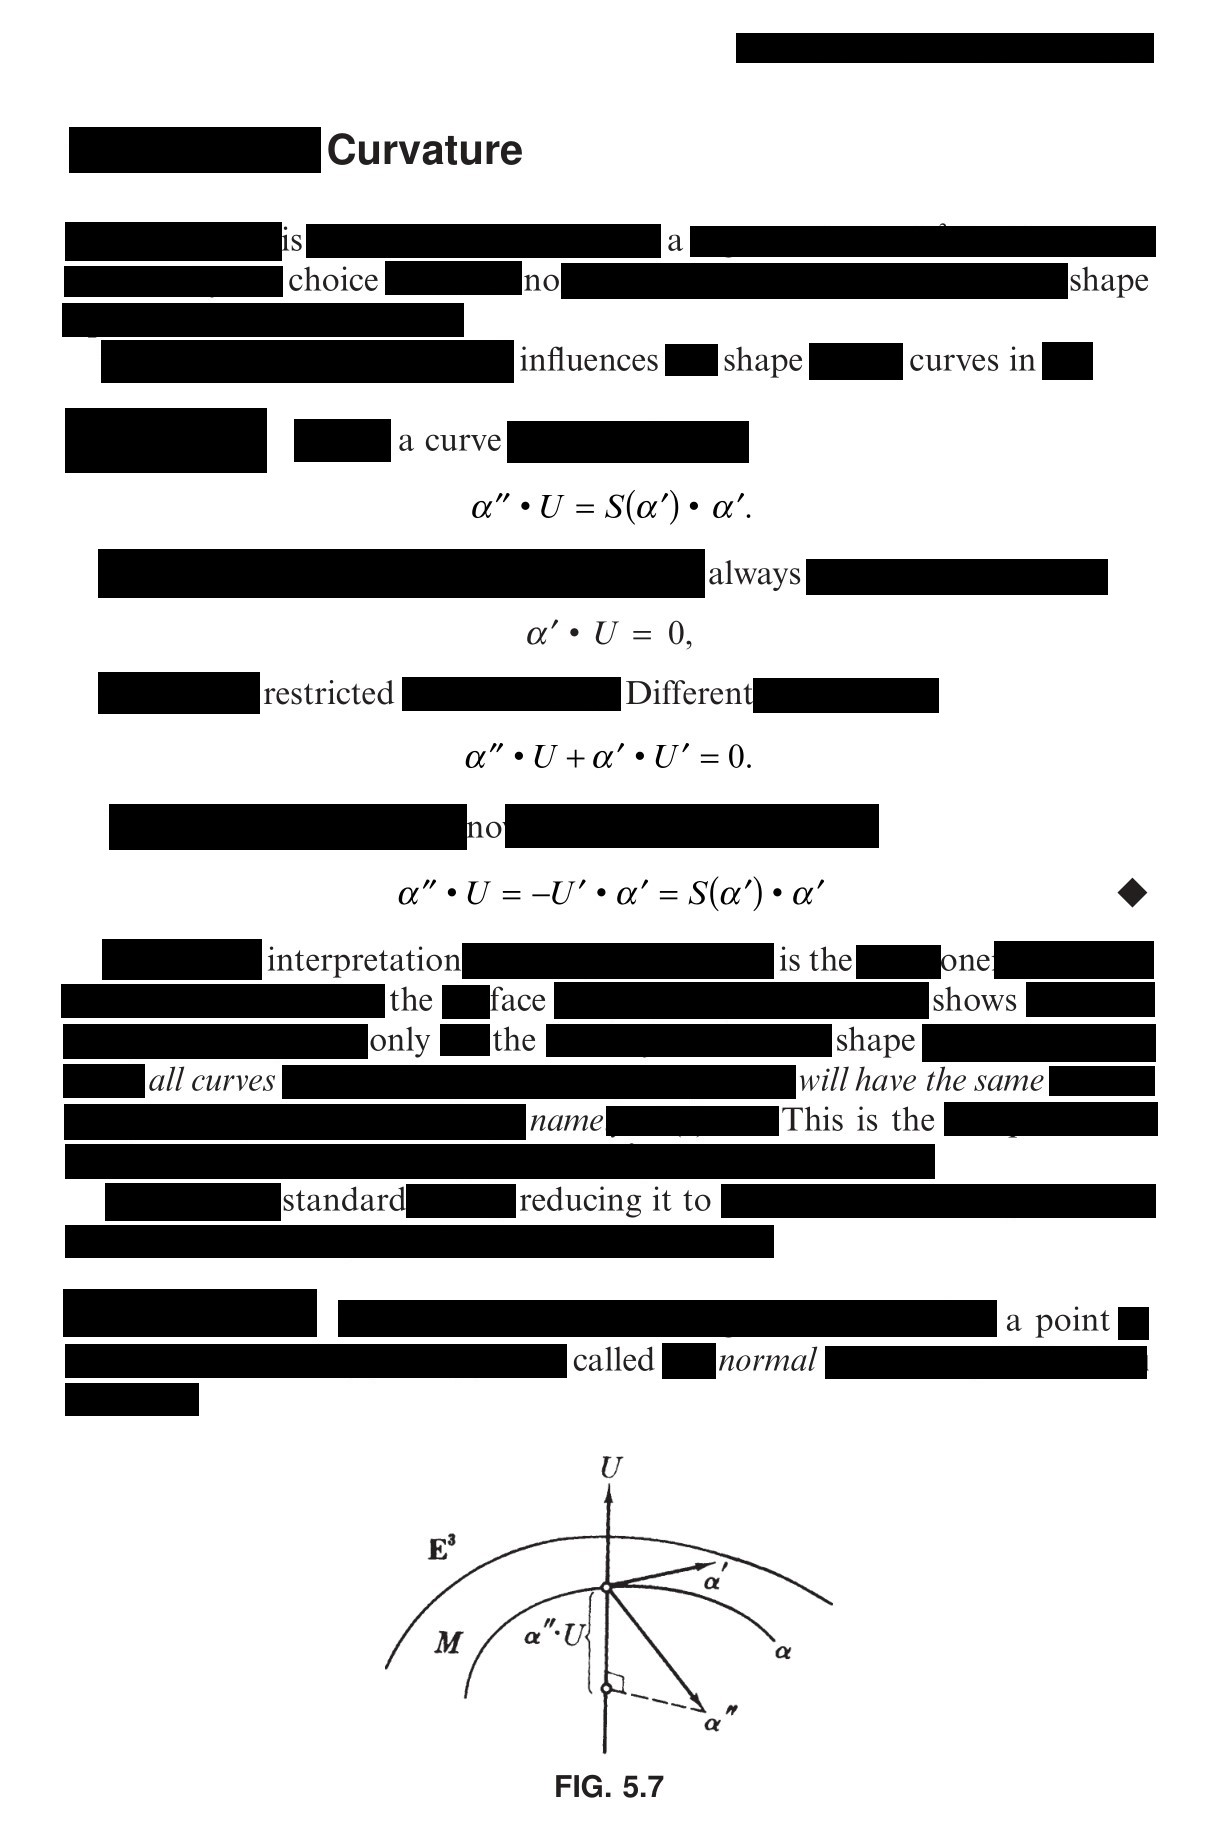 An erasure poem entitled 'Curvature is Normal' from the book 'Elementary Differential Geometry' by Barrett O'Neill